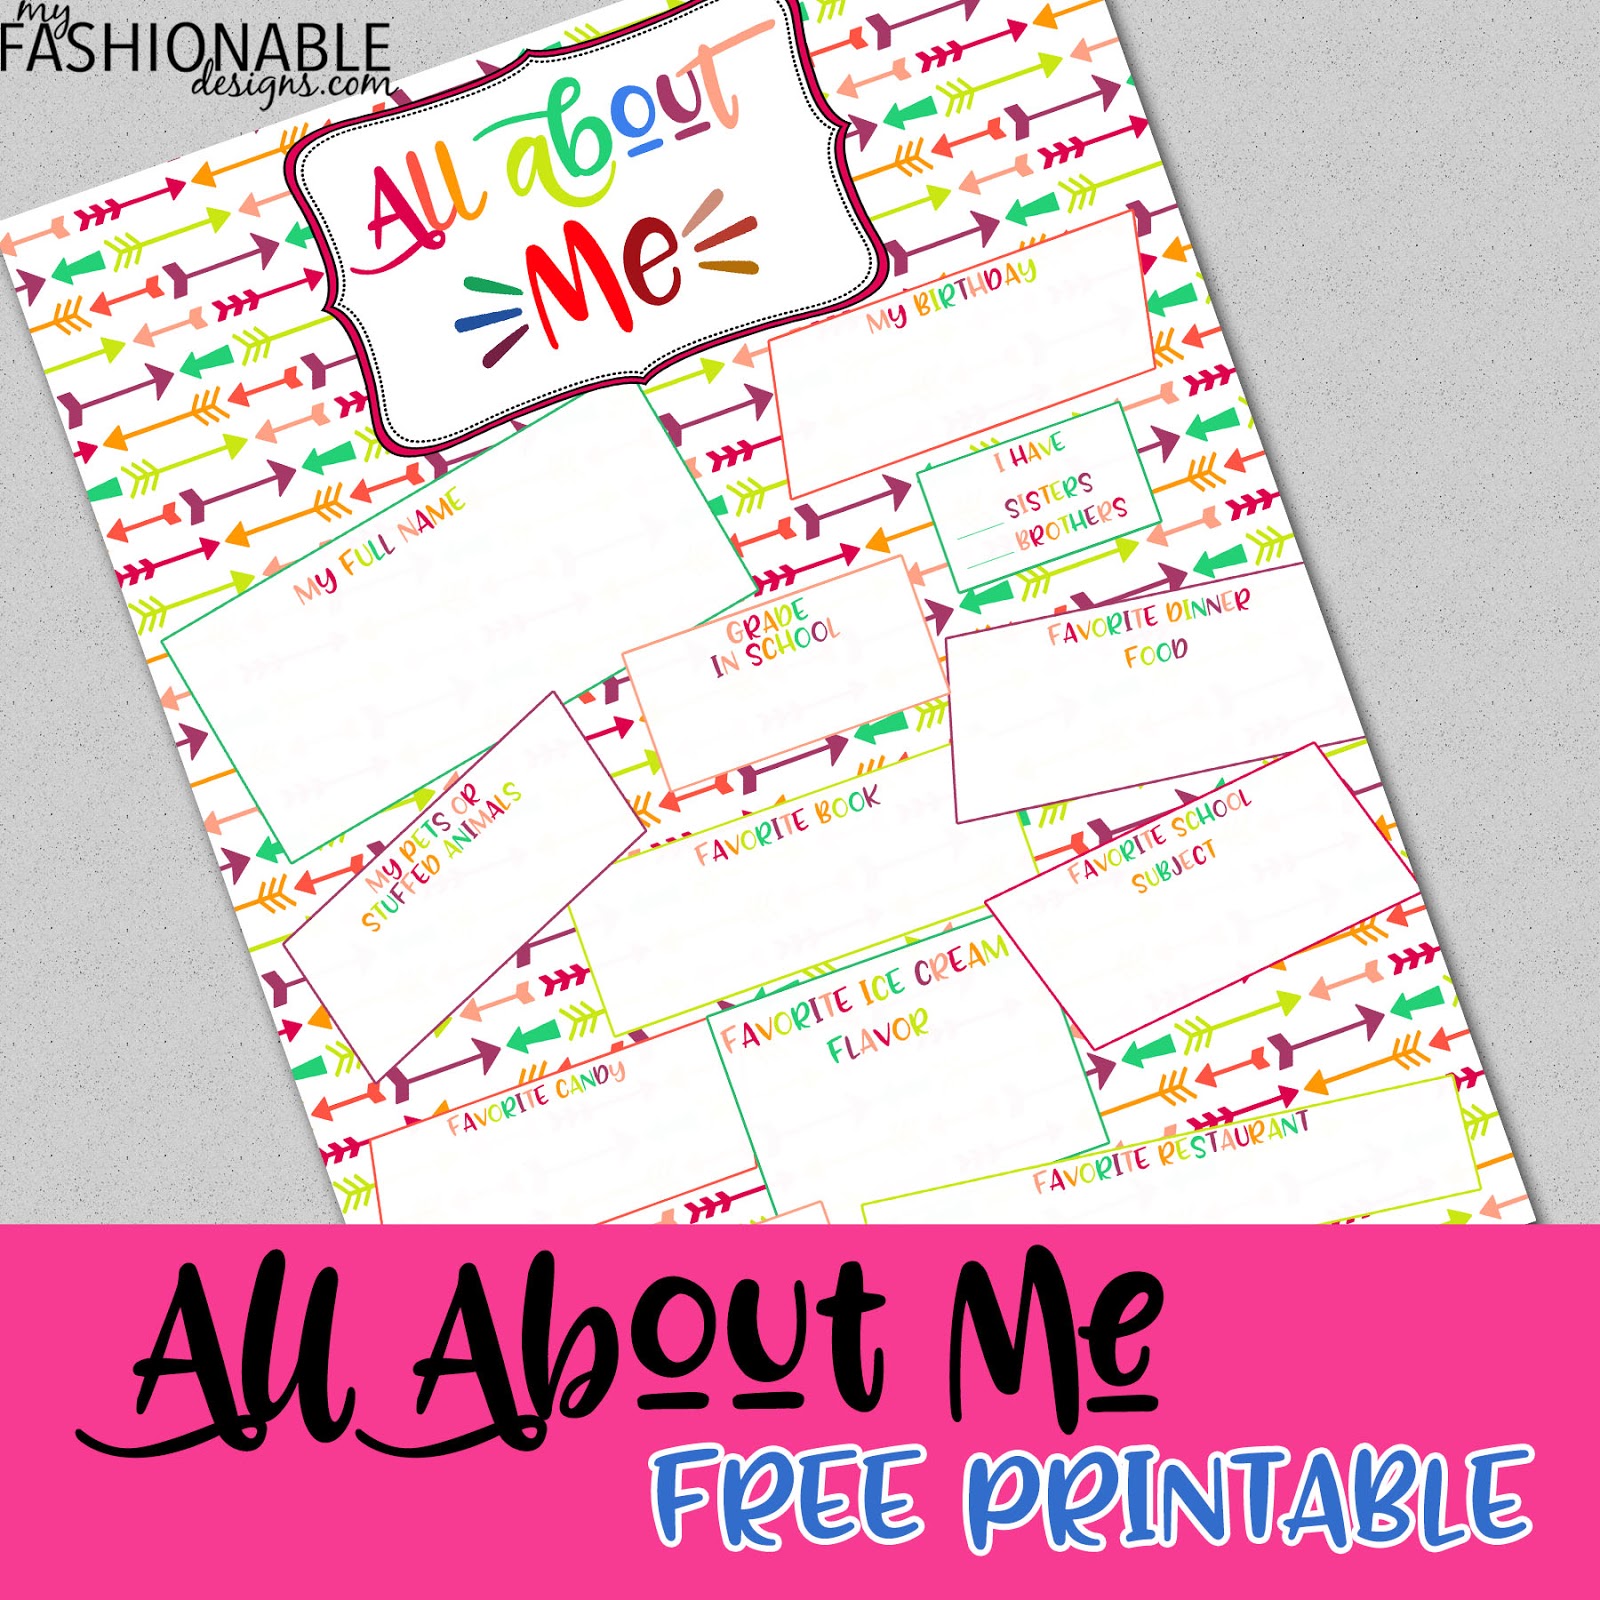 My Fashionable Designs: Free Printable All About Me Page